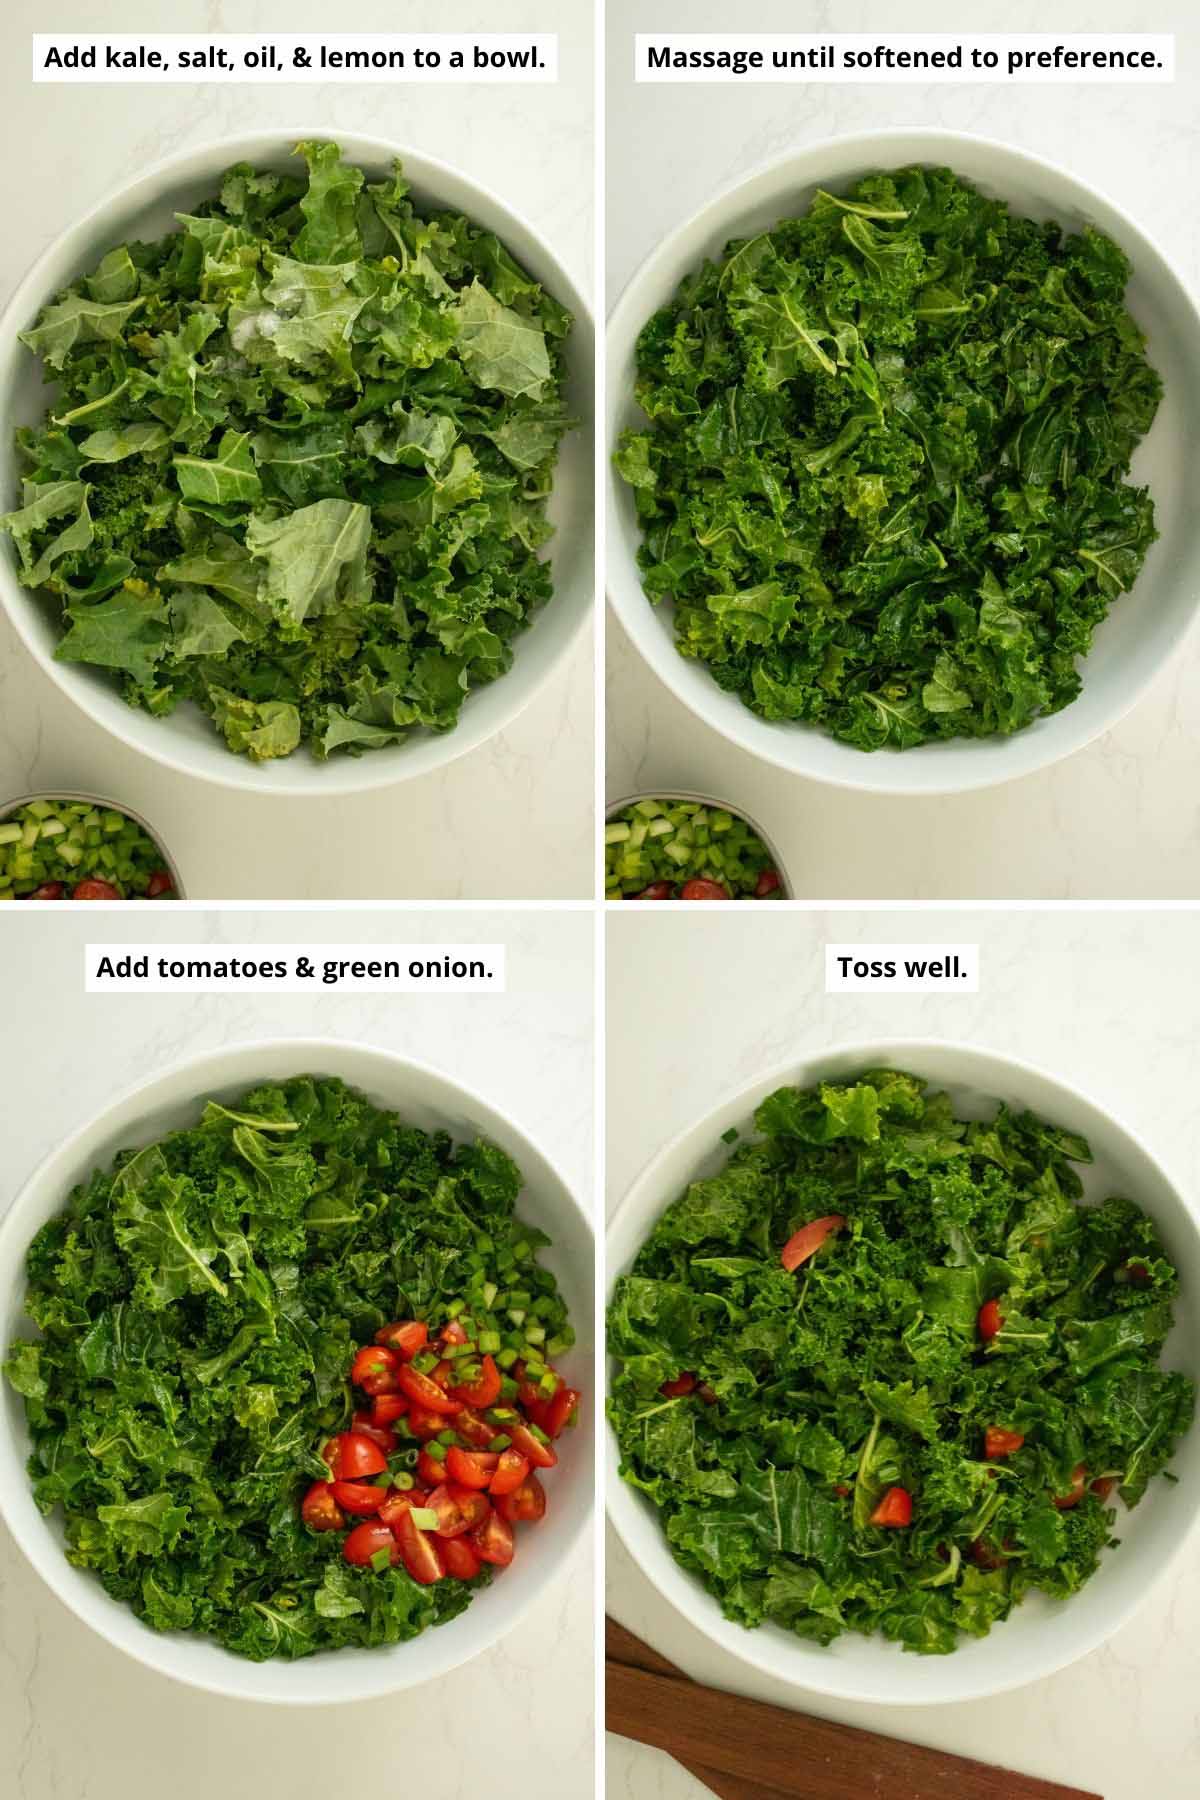 image collage showing the kale before and after massaging and the veggies before and after tossing into the massaged kale